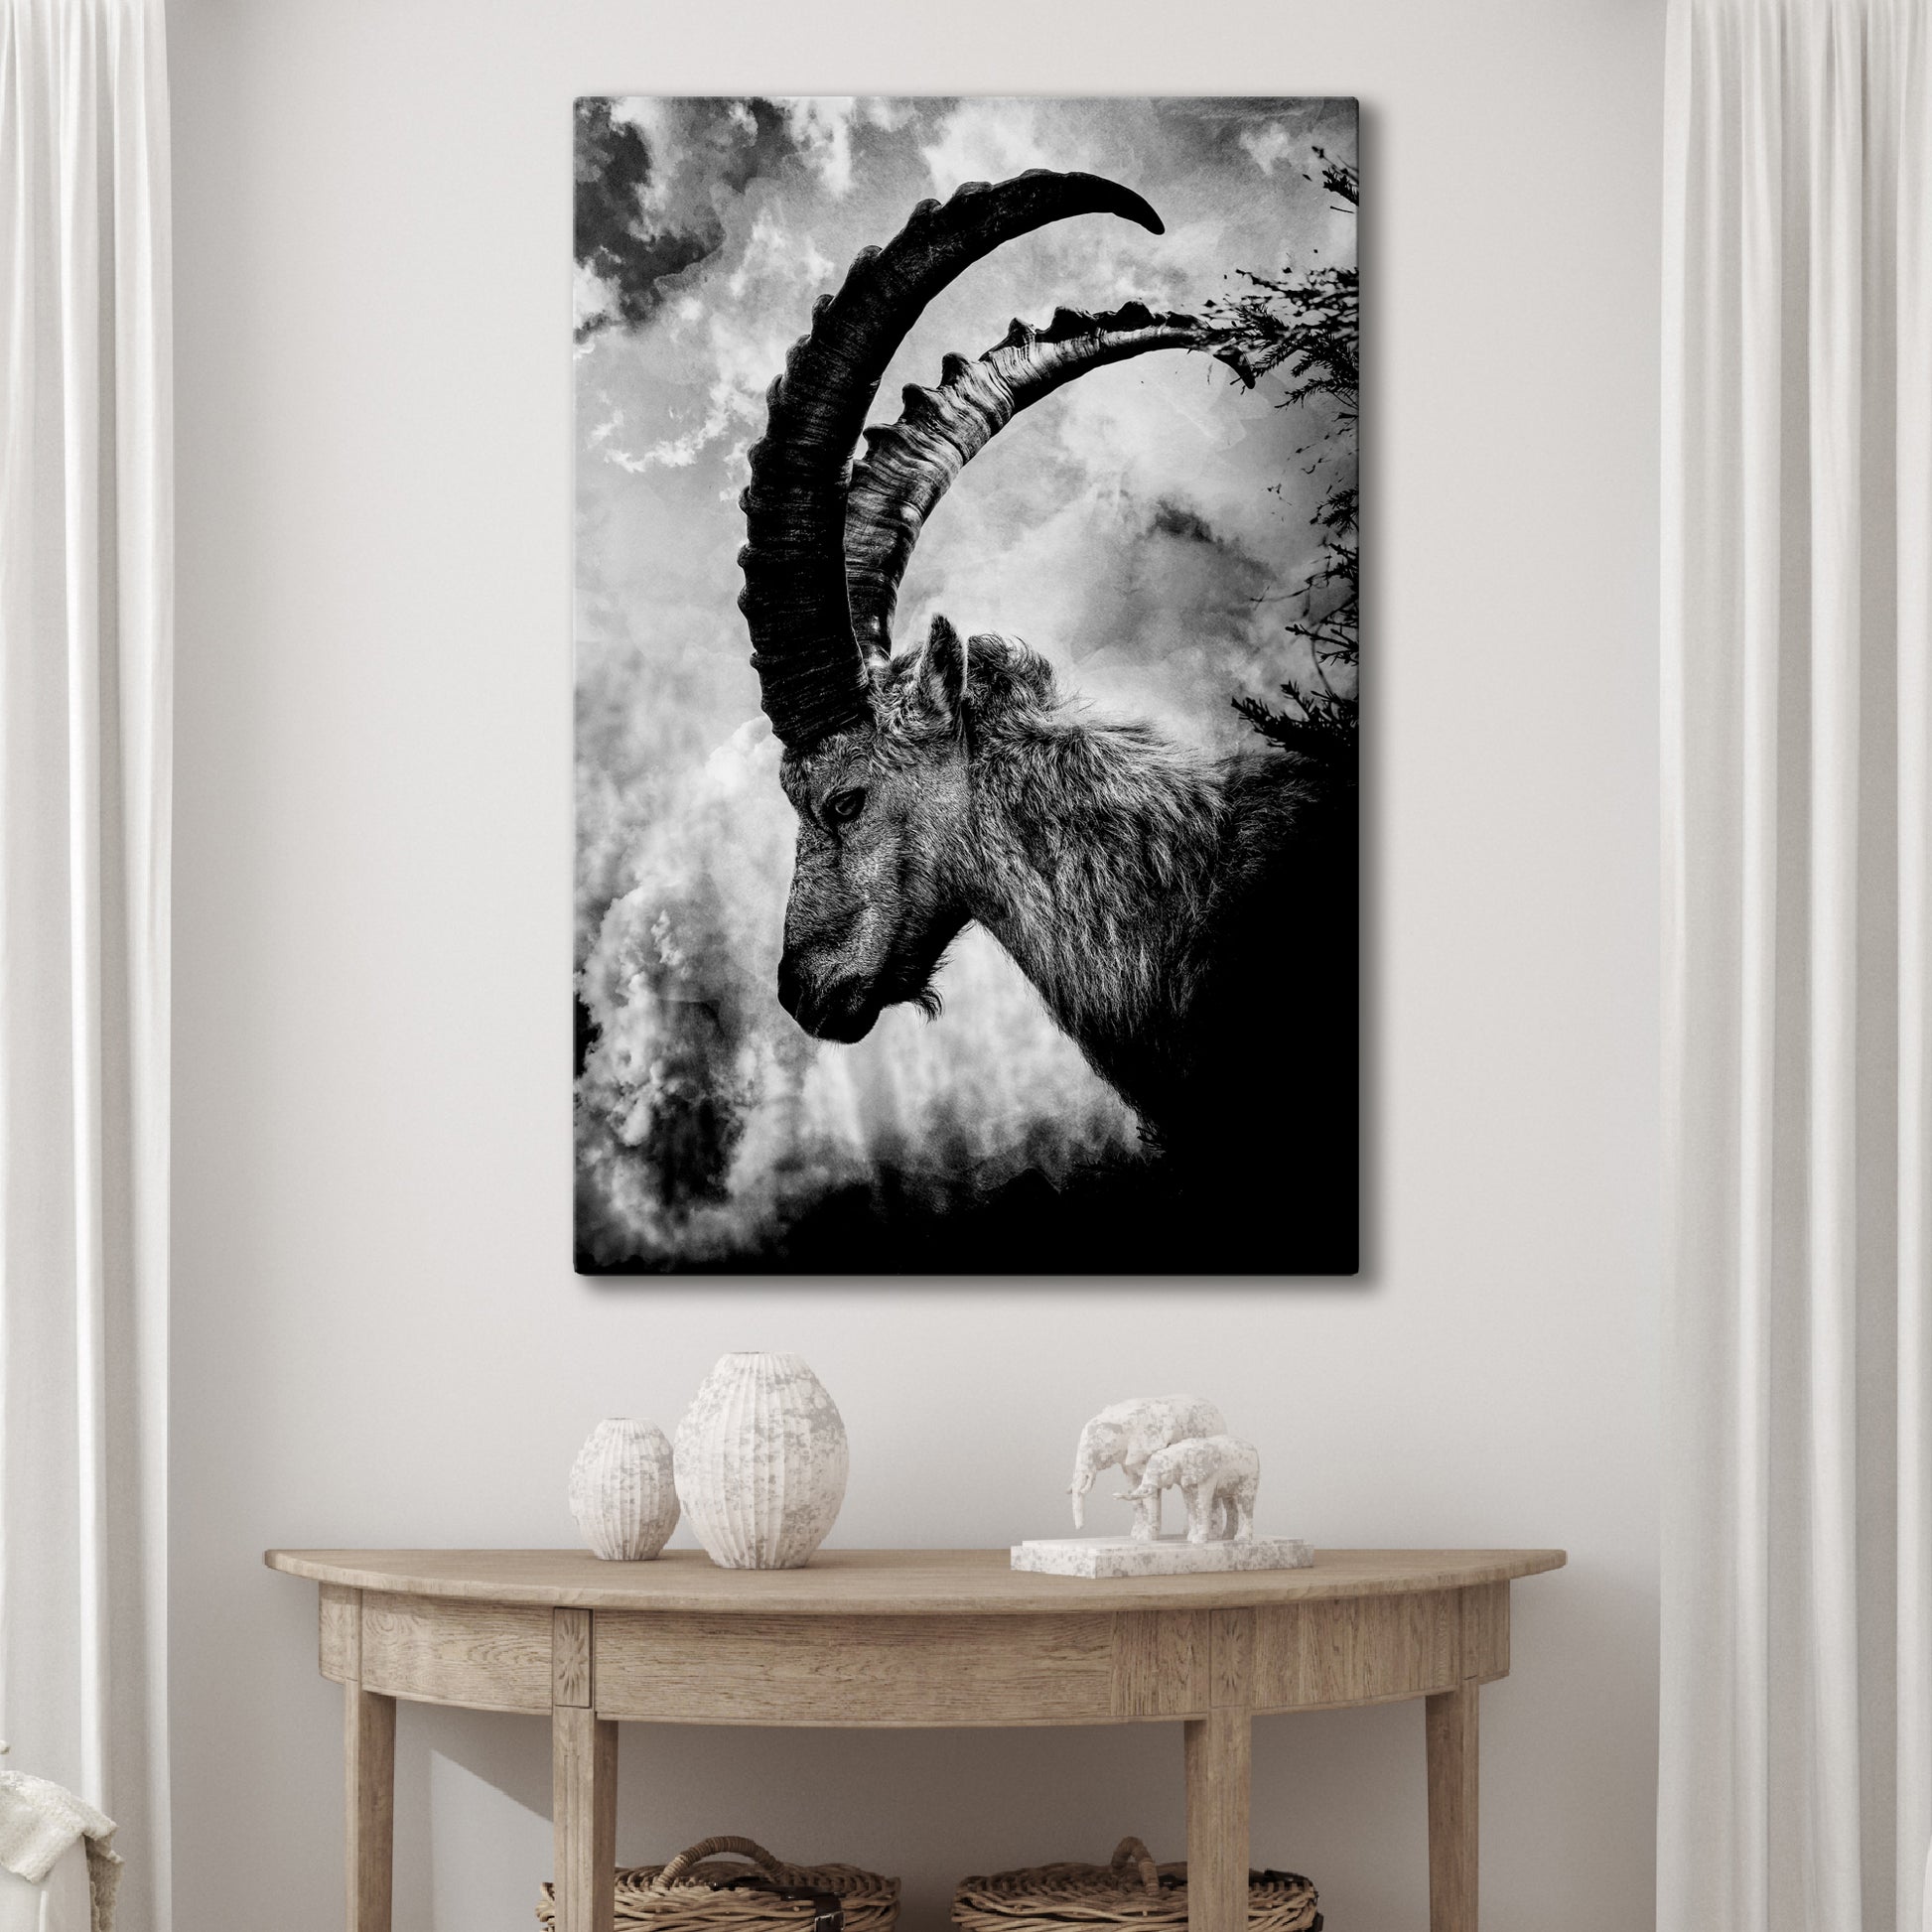 Monochrome Long Horned Goat Canvas Wall Art - Image by Tailored Canvases